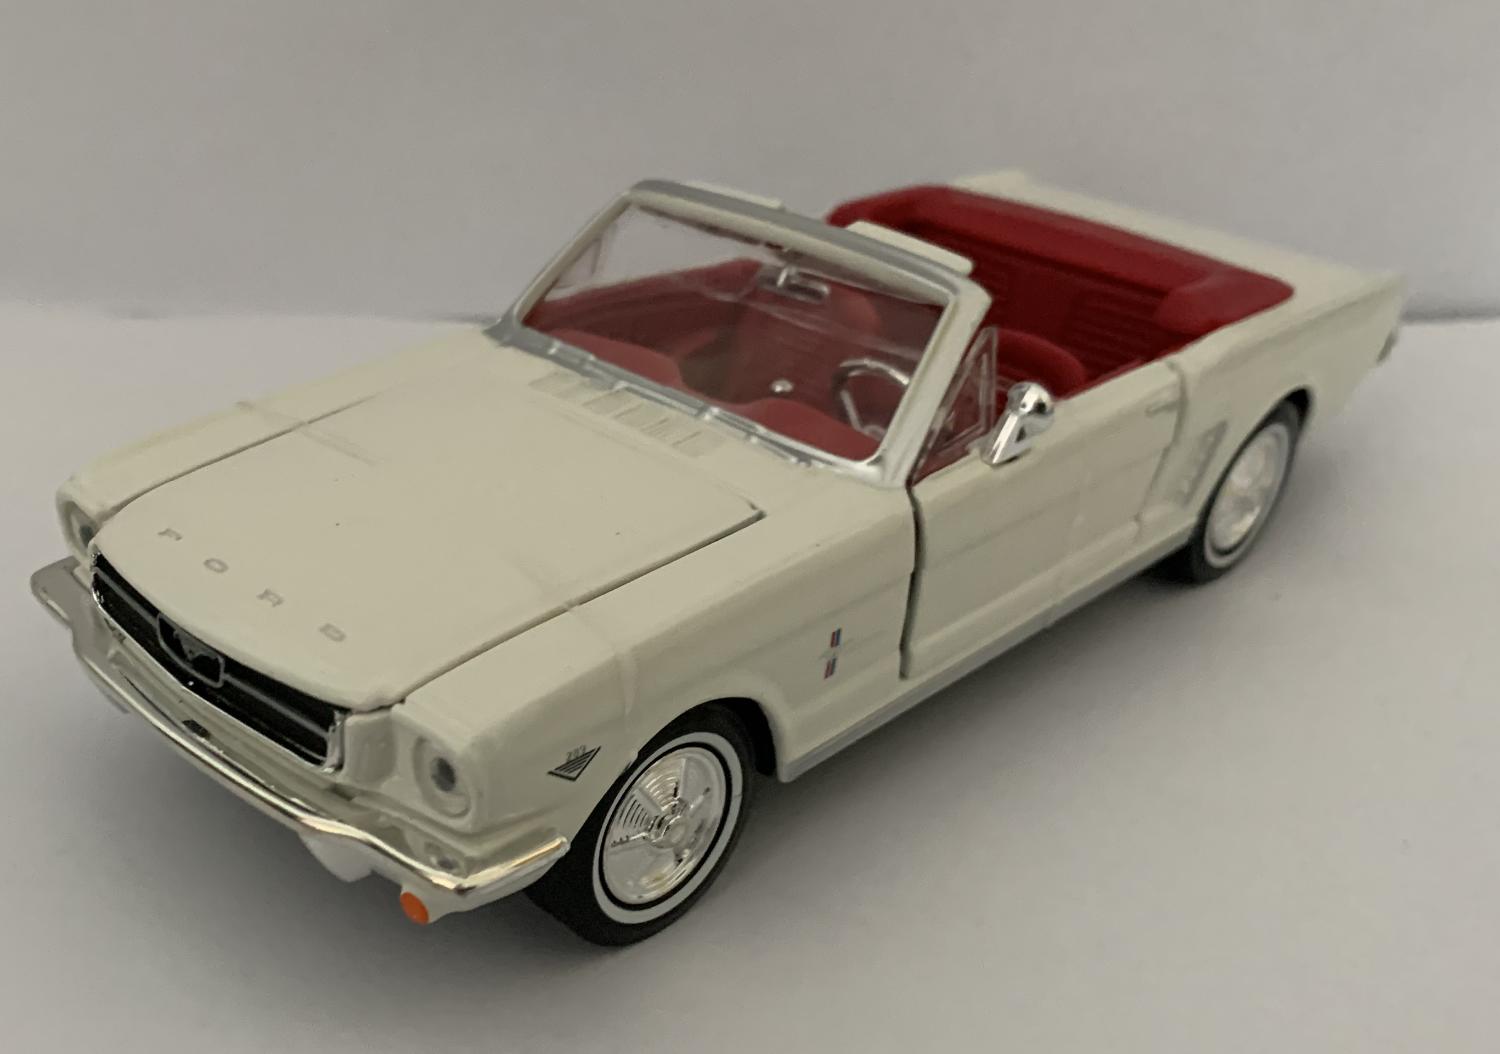 007’s Ford Mustang ½ 1964 in white from Goldfinger 1:24 scale model from Motormax, James Bond 60 Years of Bond